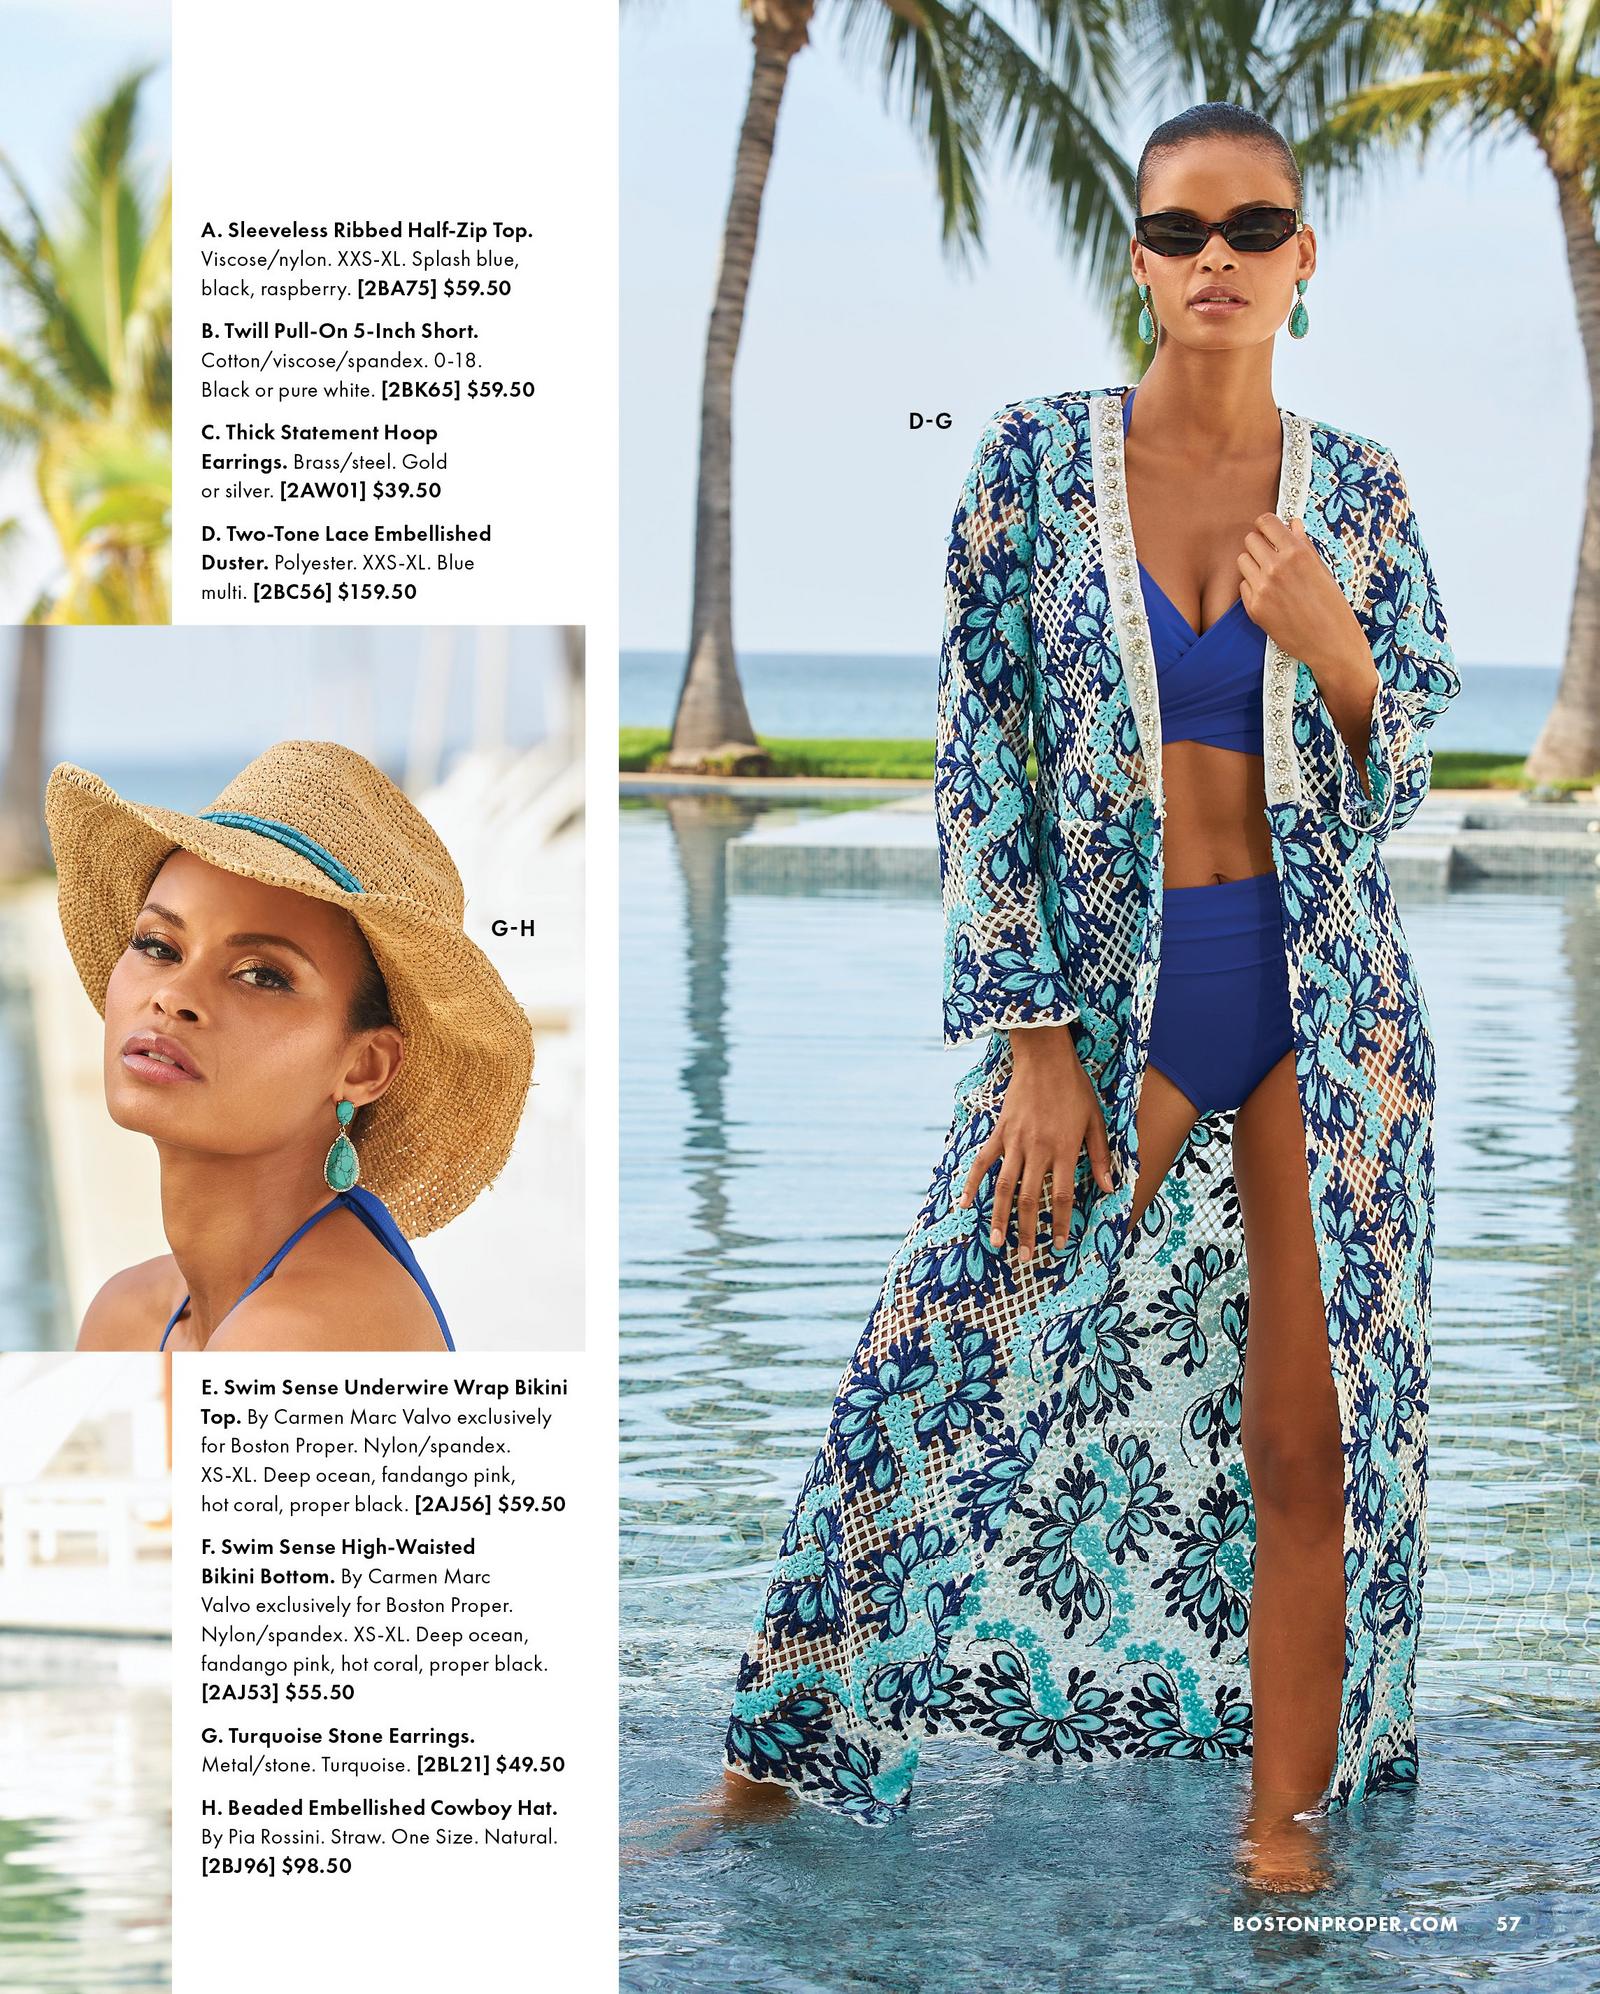 left model wearing a beaded cowboy hat and turquoise stone earrings. right model wearing a blue two-tone lace embellished duster, navy bikini, and turquoise stone earrings.